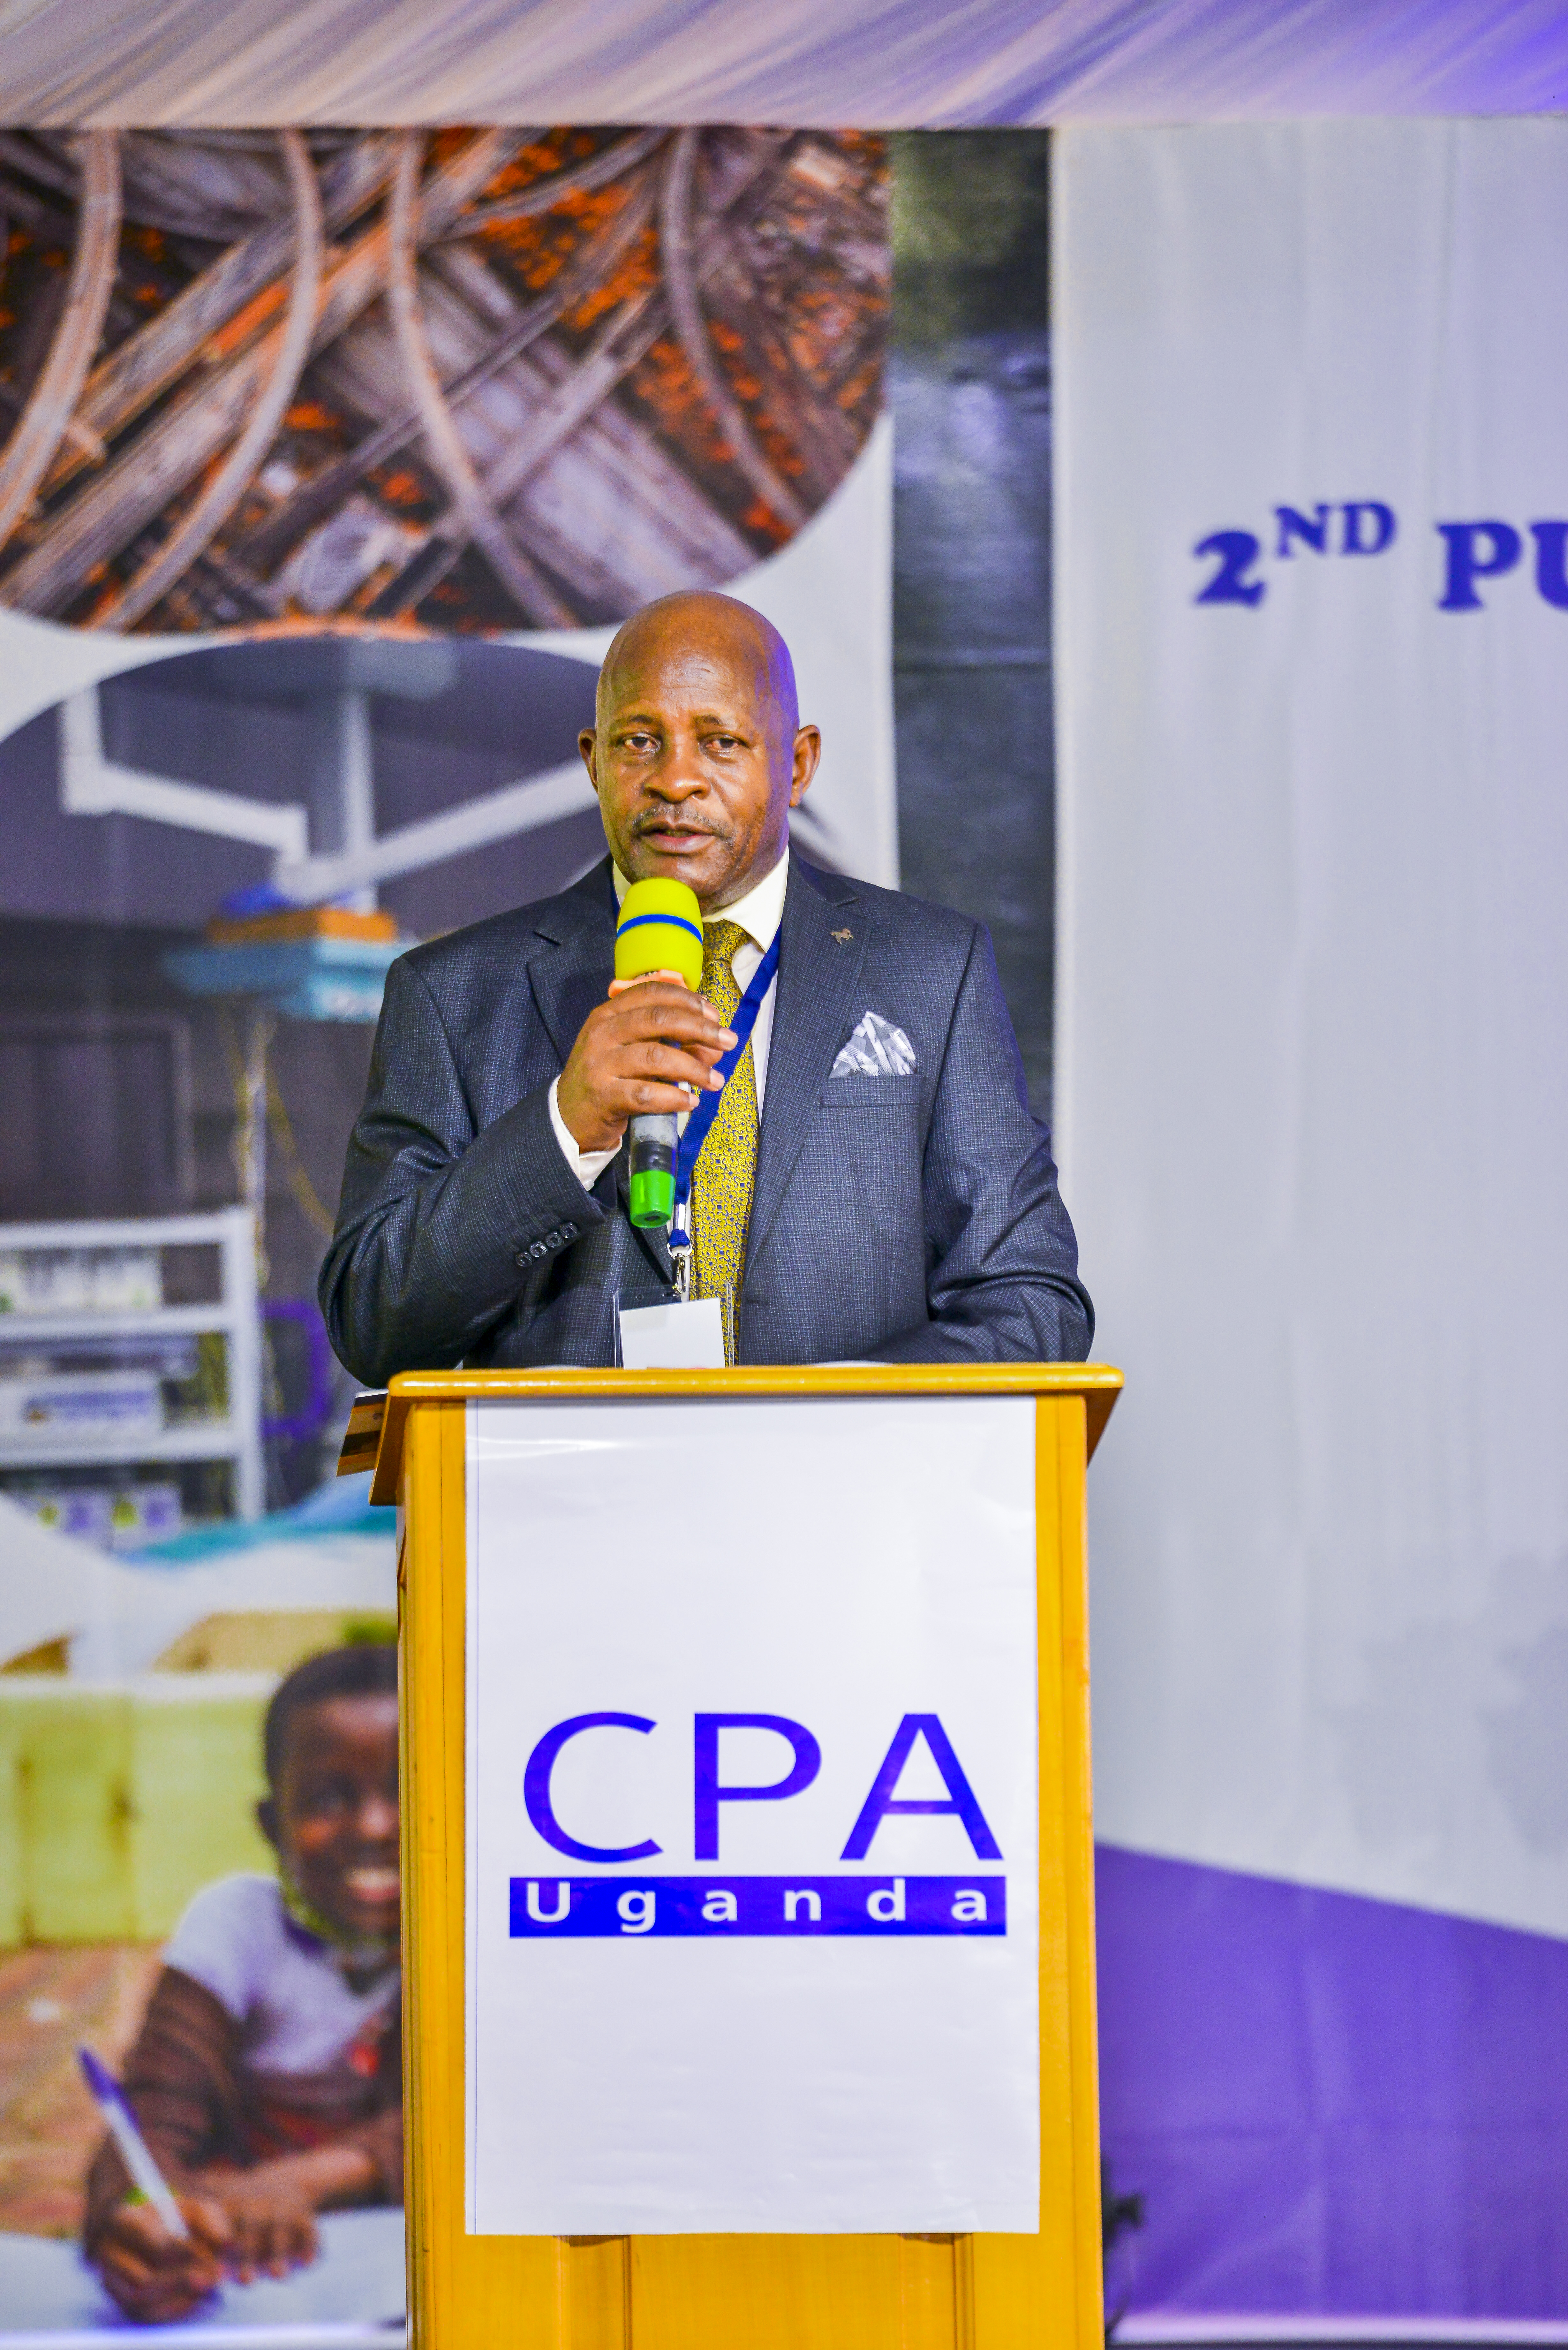 CPA David Bunnya Sserebe, Chairperson Events Management Committee giving remarks at the opening ceremony.